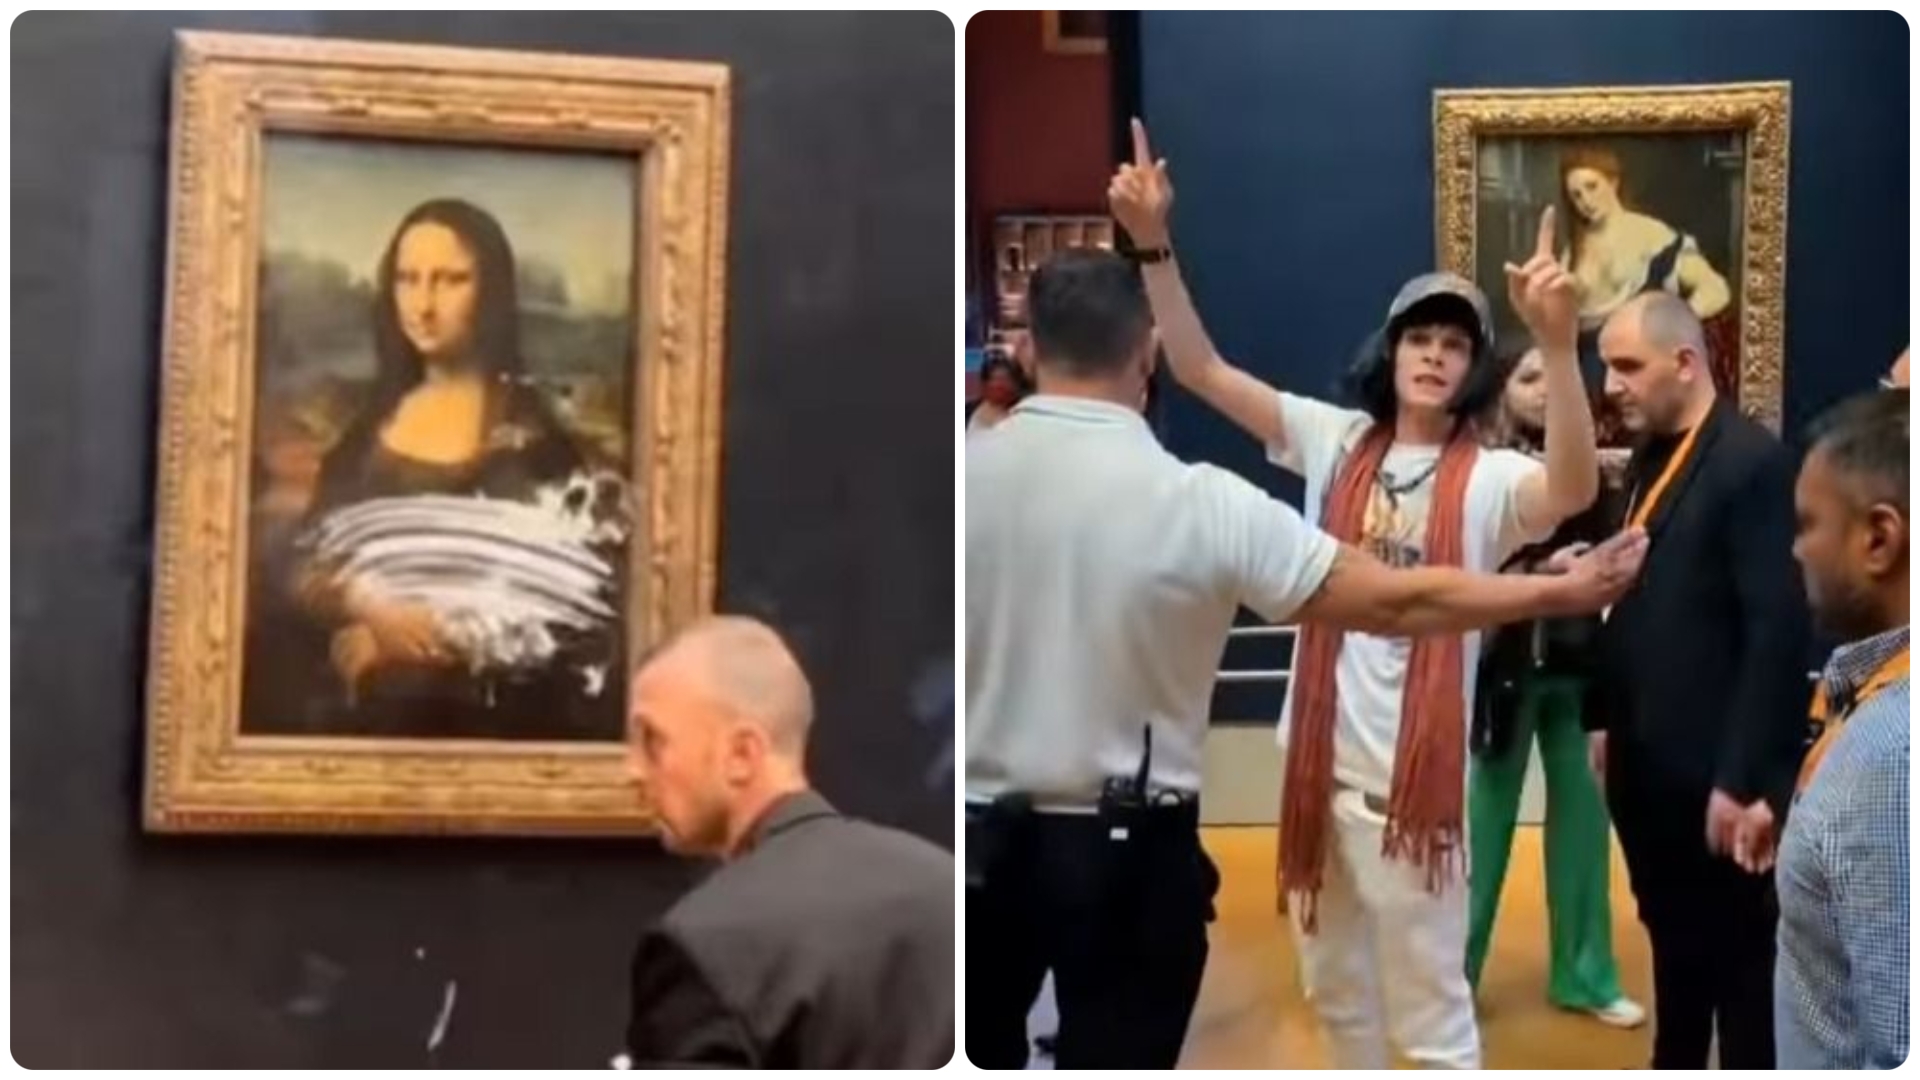 In this article, we are going to cover the Mona Lisa painting cake attack carried out by a protester last Sunday with videos and all of the details.